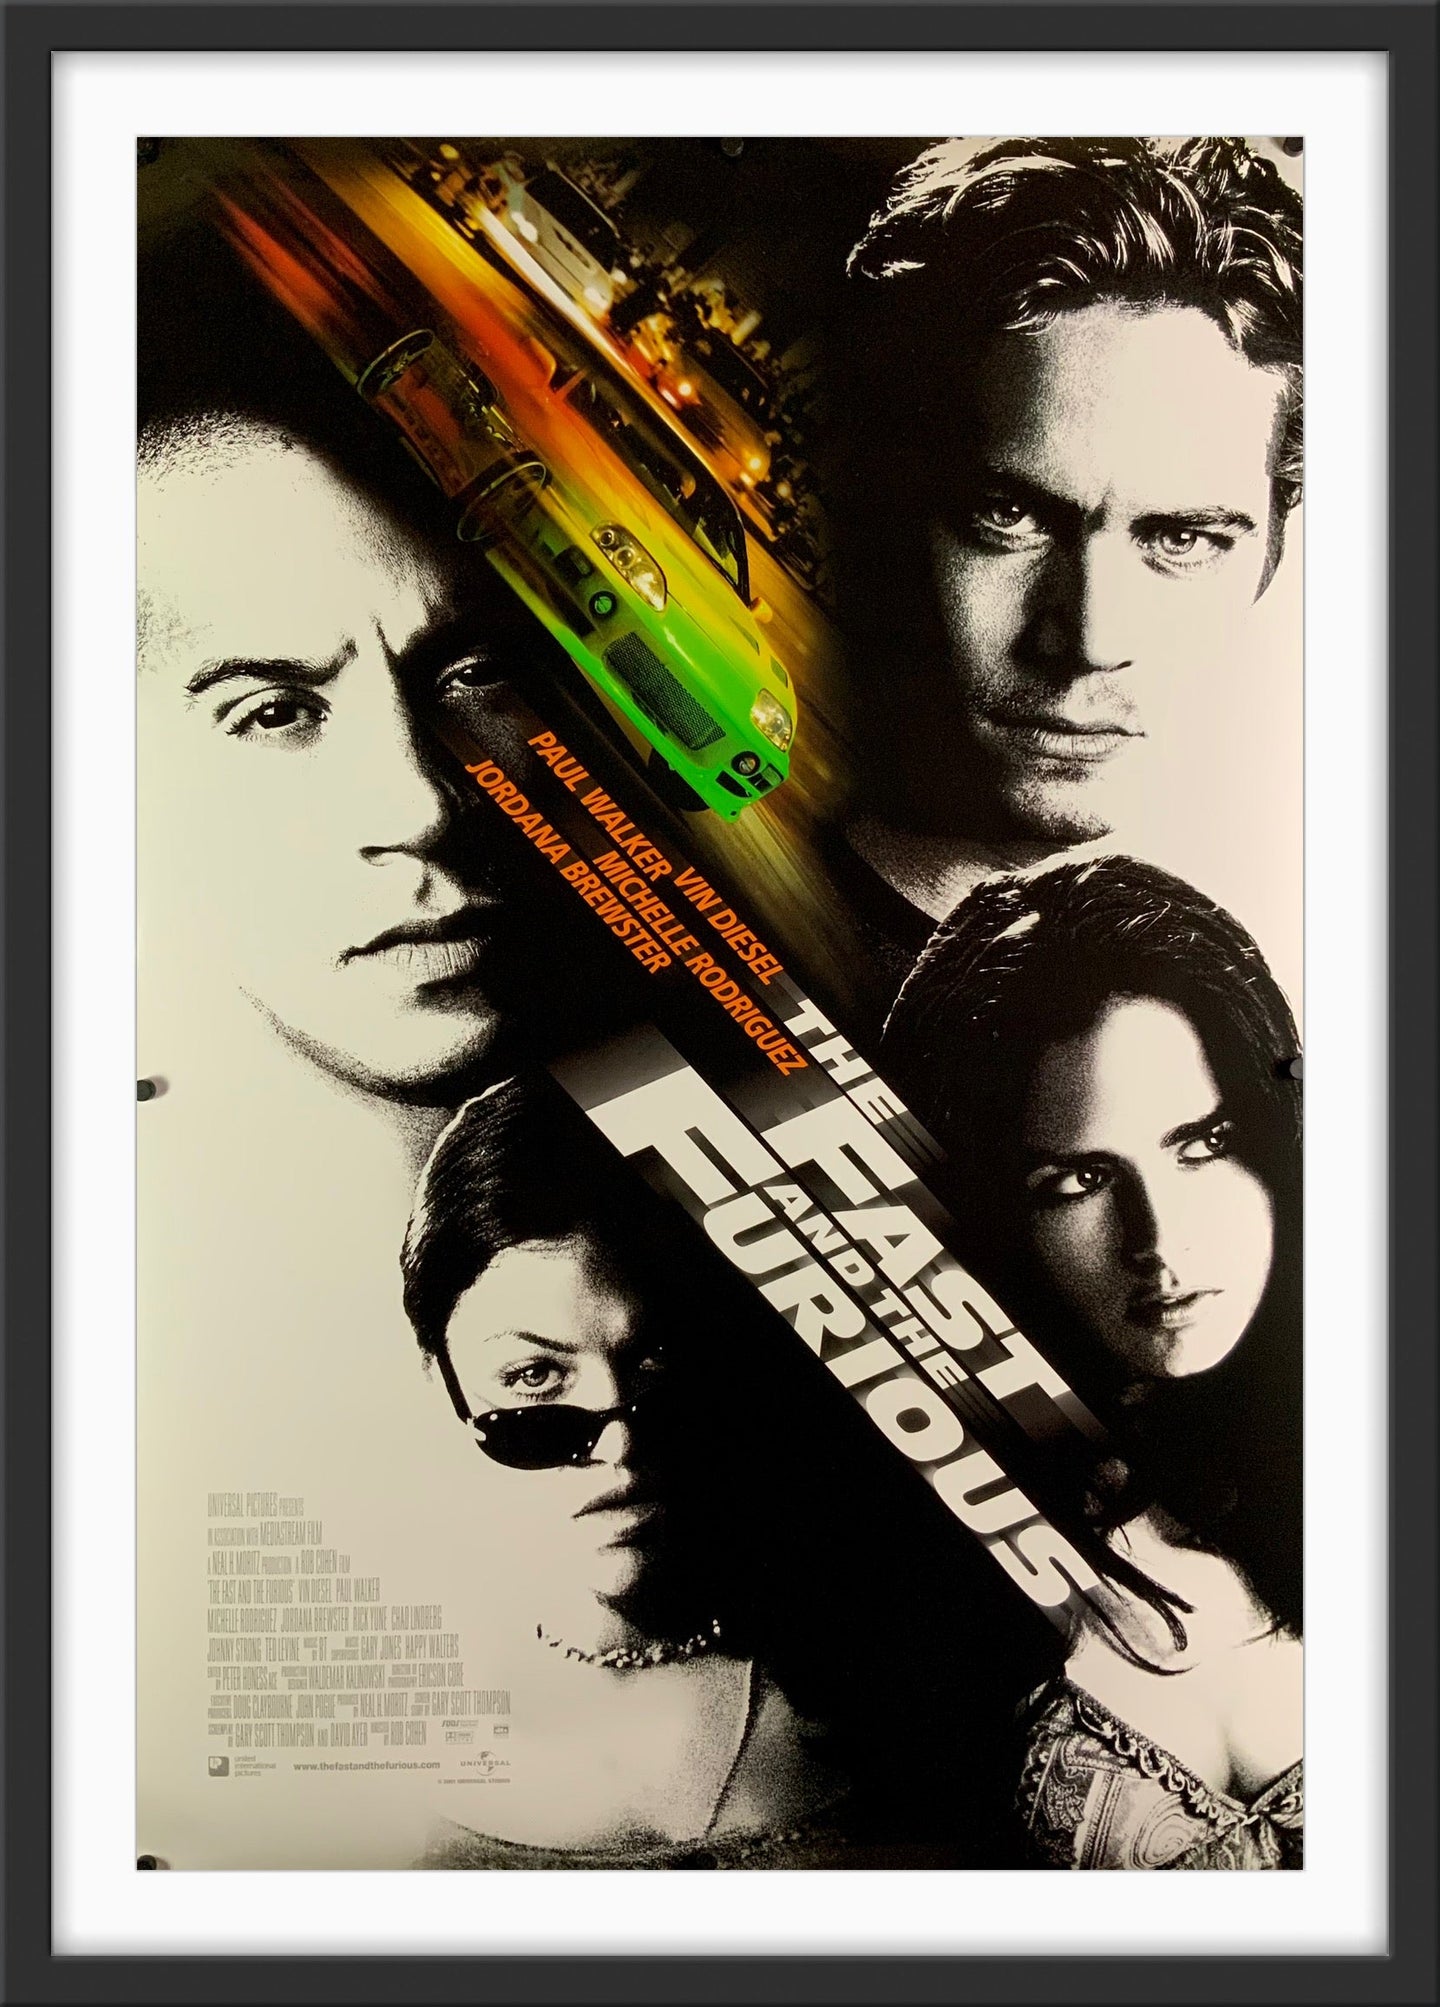 fast and furious 1 poster